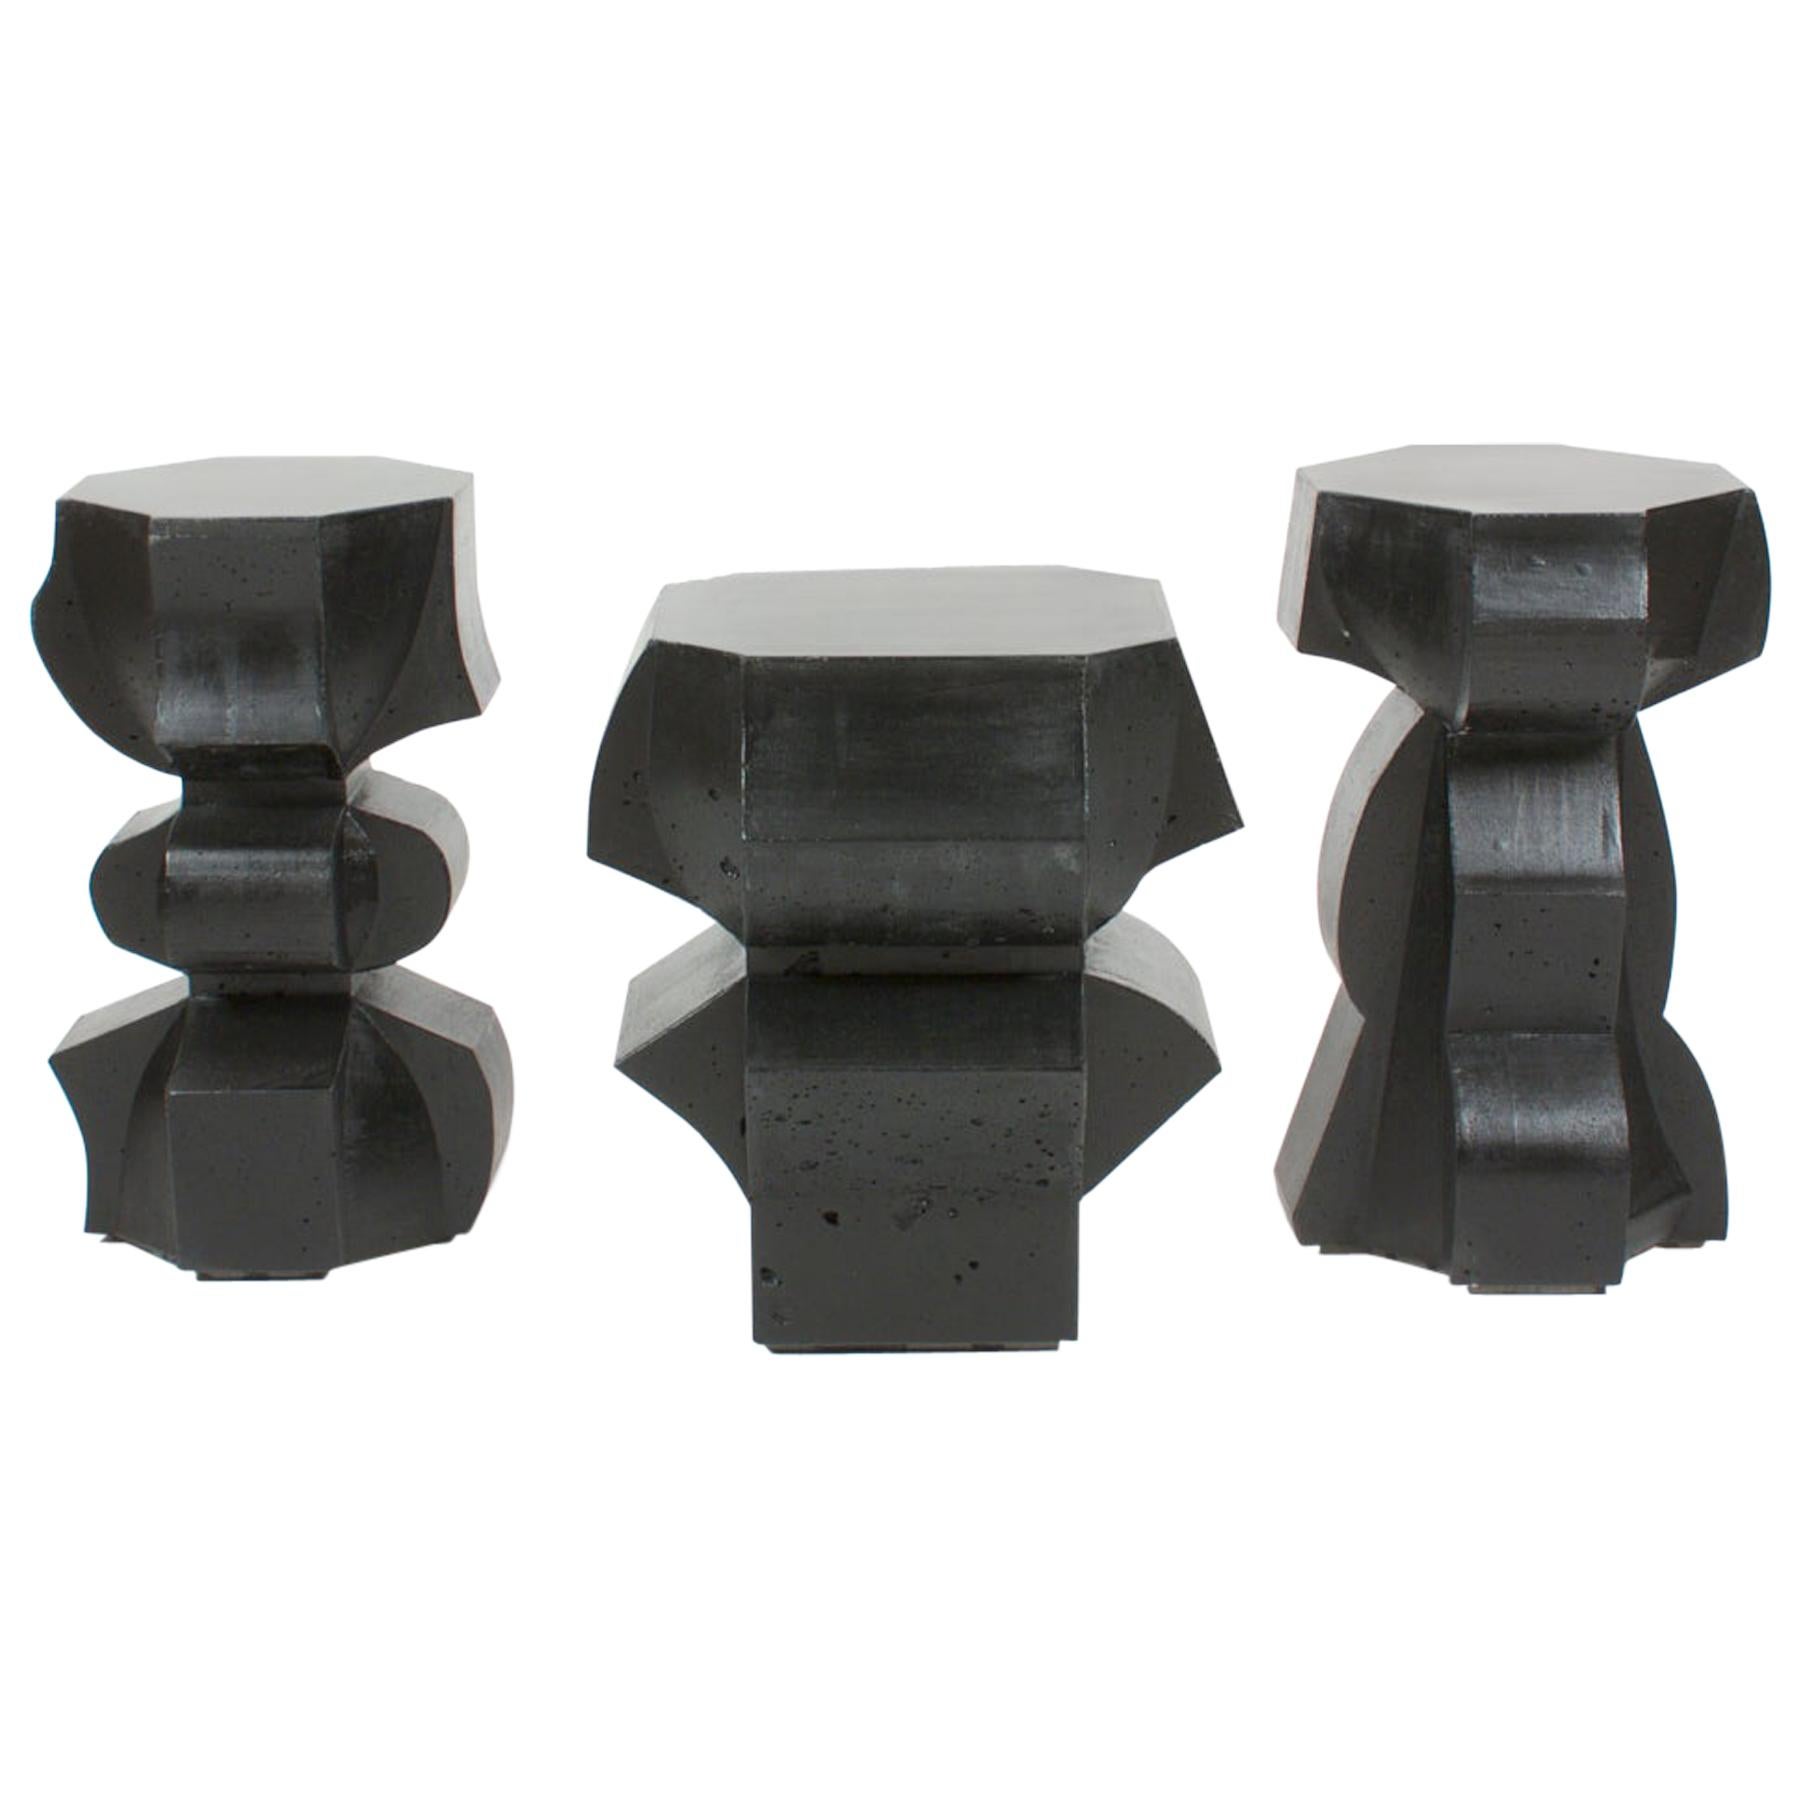 Sculptural Stool/End Tables in Black Cast Concrete by Nico Yektai